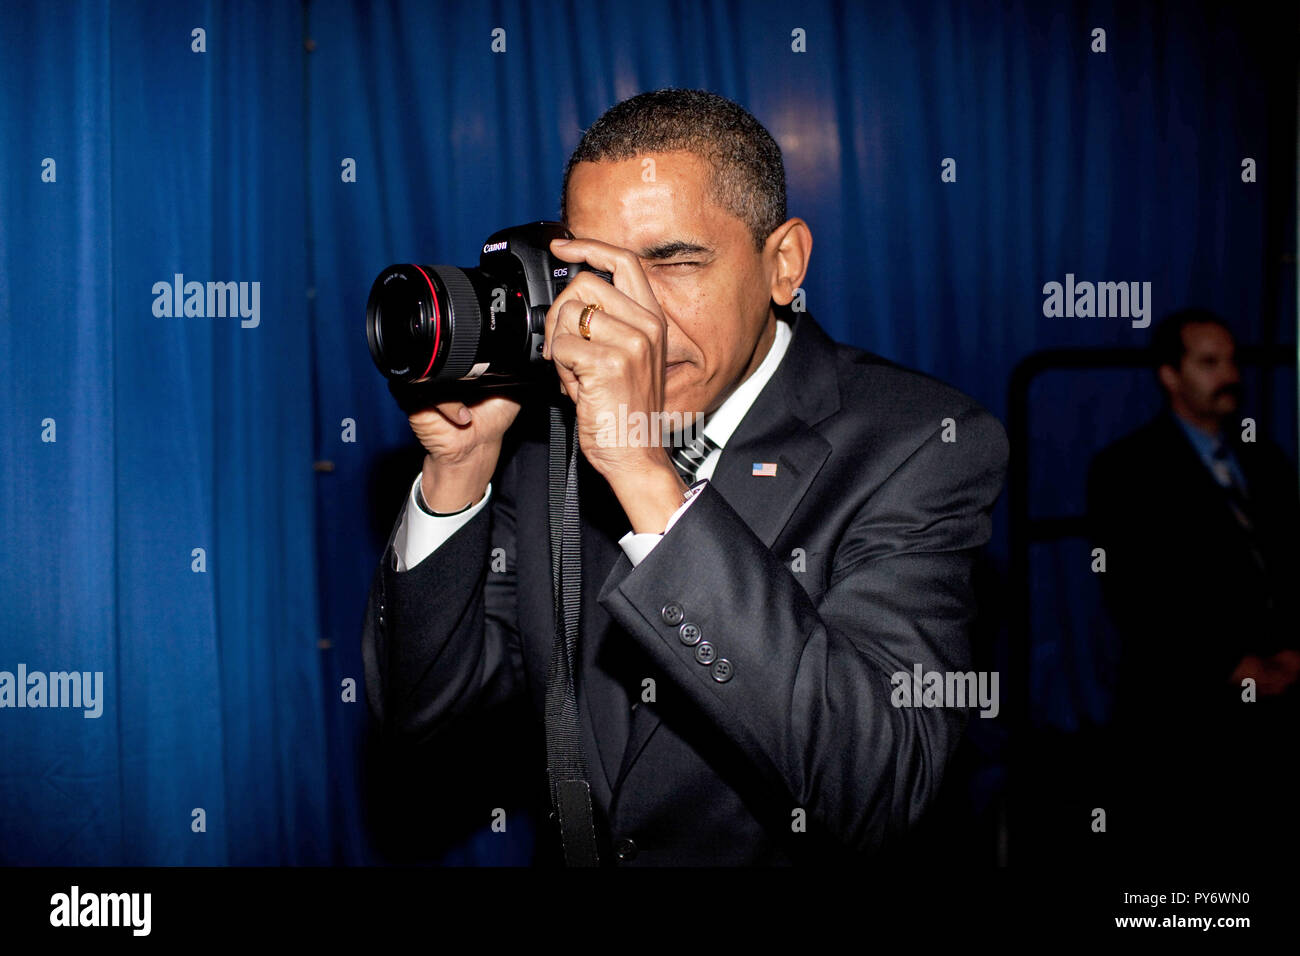 President Barack Obama takes aim with a photographer's camera backstage prior to remarks about providing mortgage payment relief for responsible homeowners. Dobson High School. Mesa, Arizona 2/18/09.  Official White House Photo by Pete Souza Stock Photo